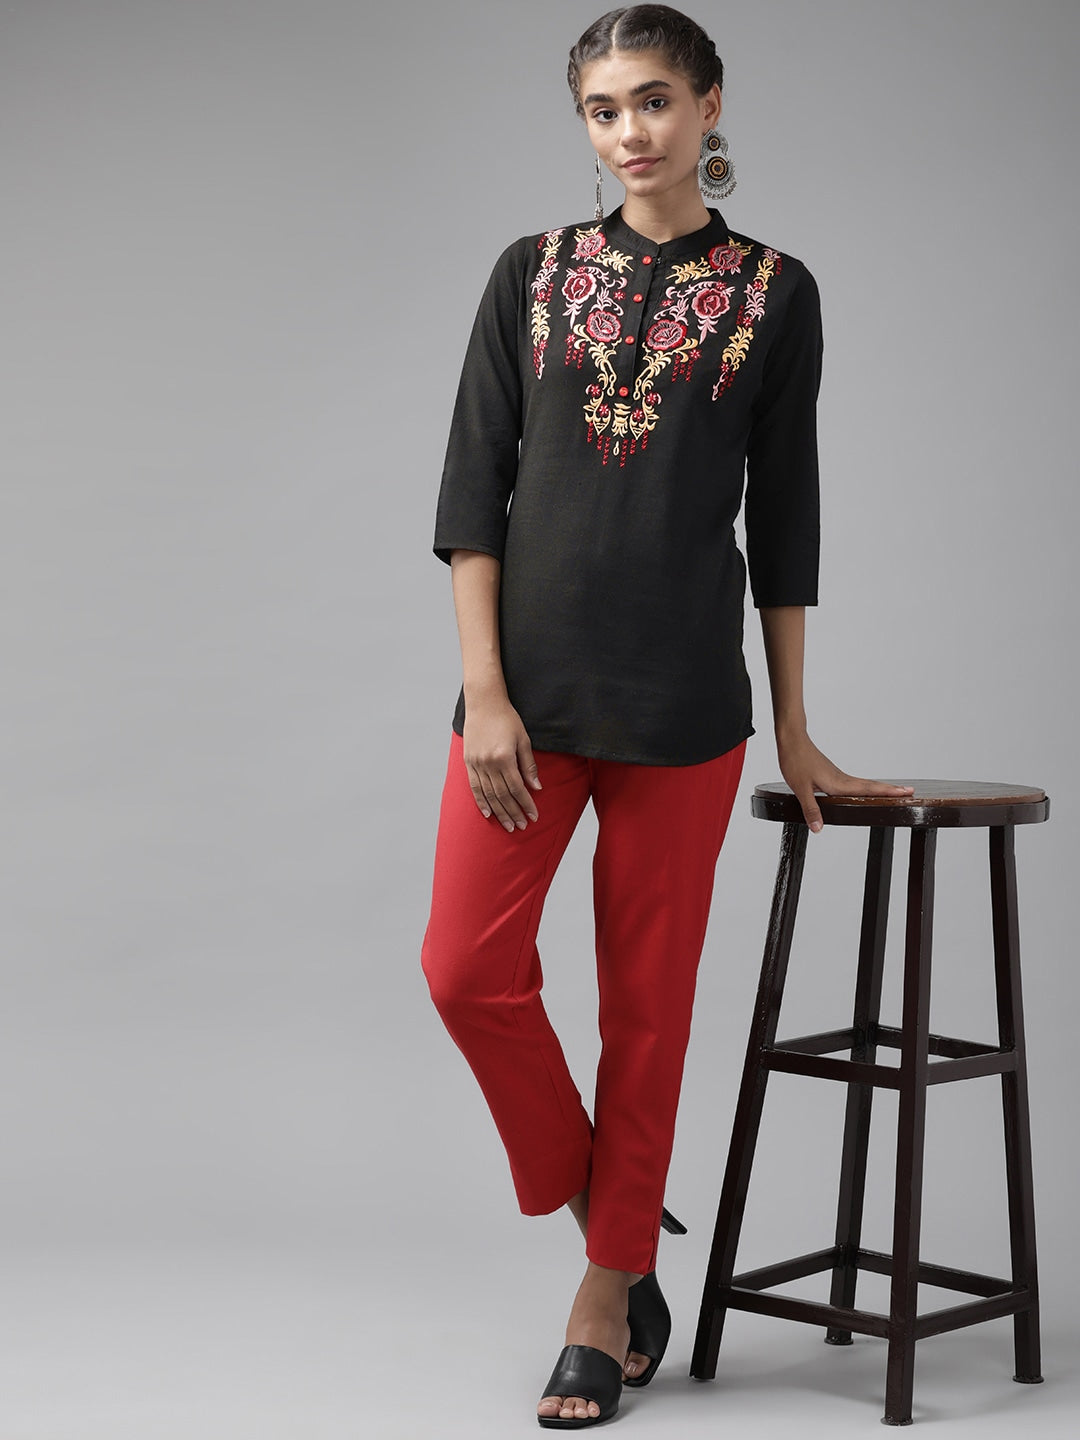 Black Floral Embroidered Top-Yufta Store-9737TOPBKS